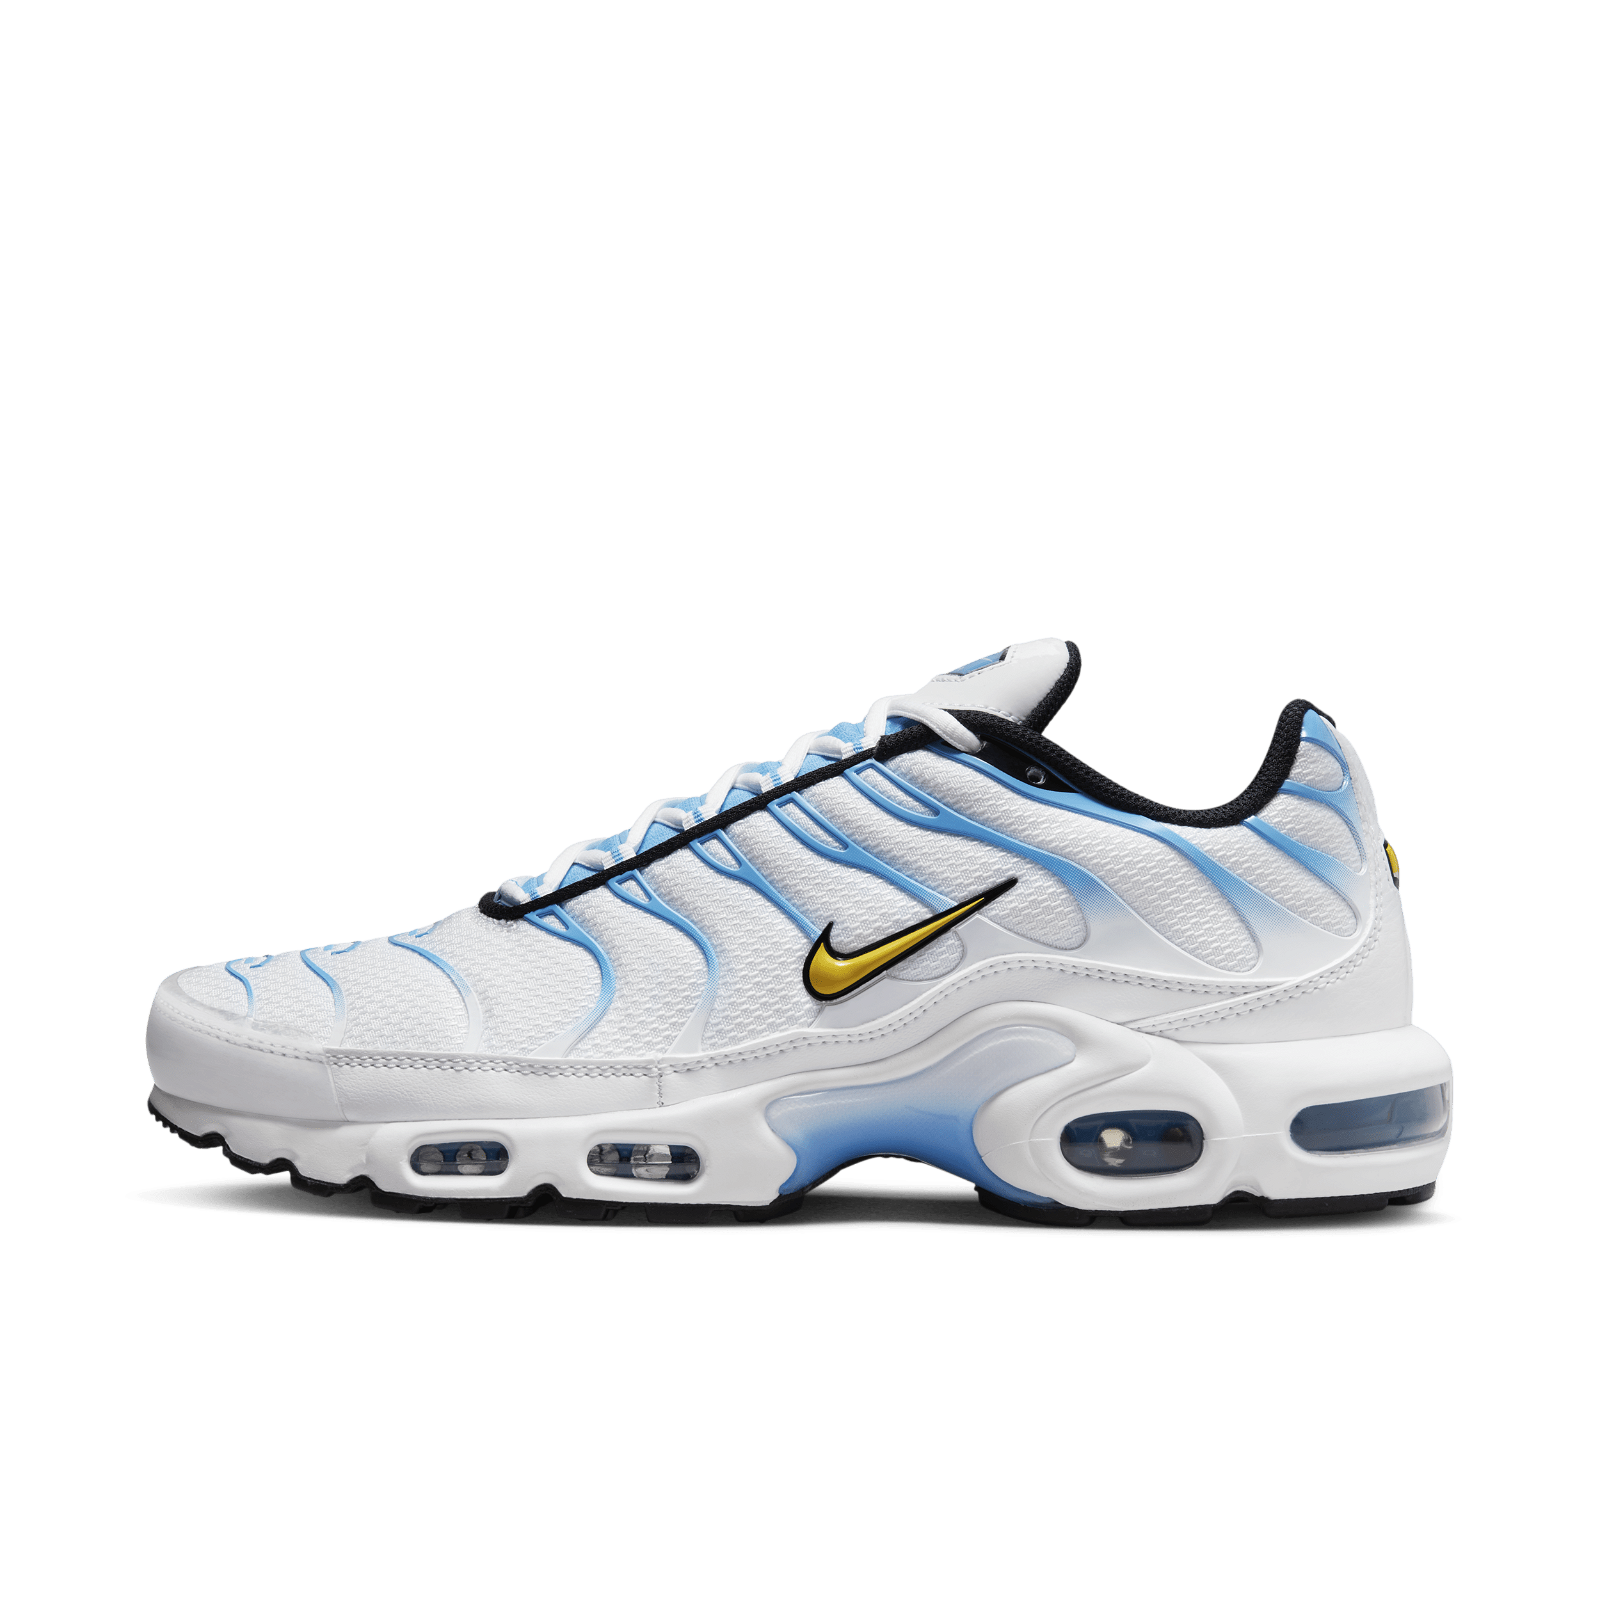 Nike TN Air Max Plus Sizing: How Do They Fit?